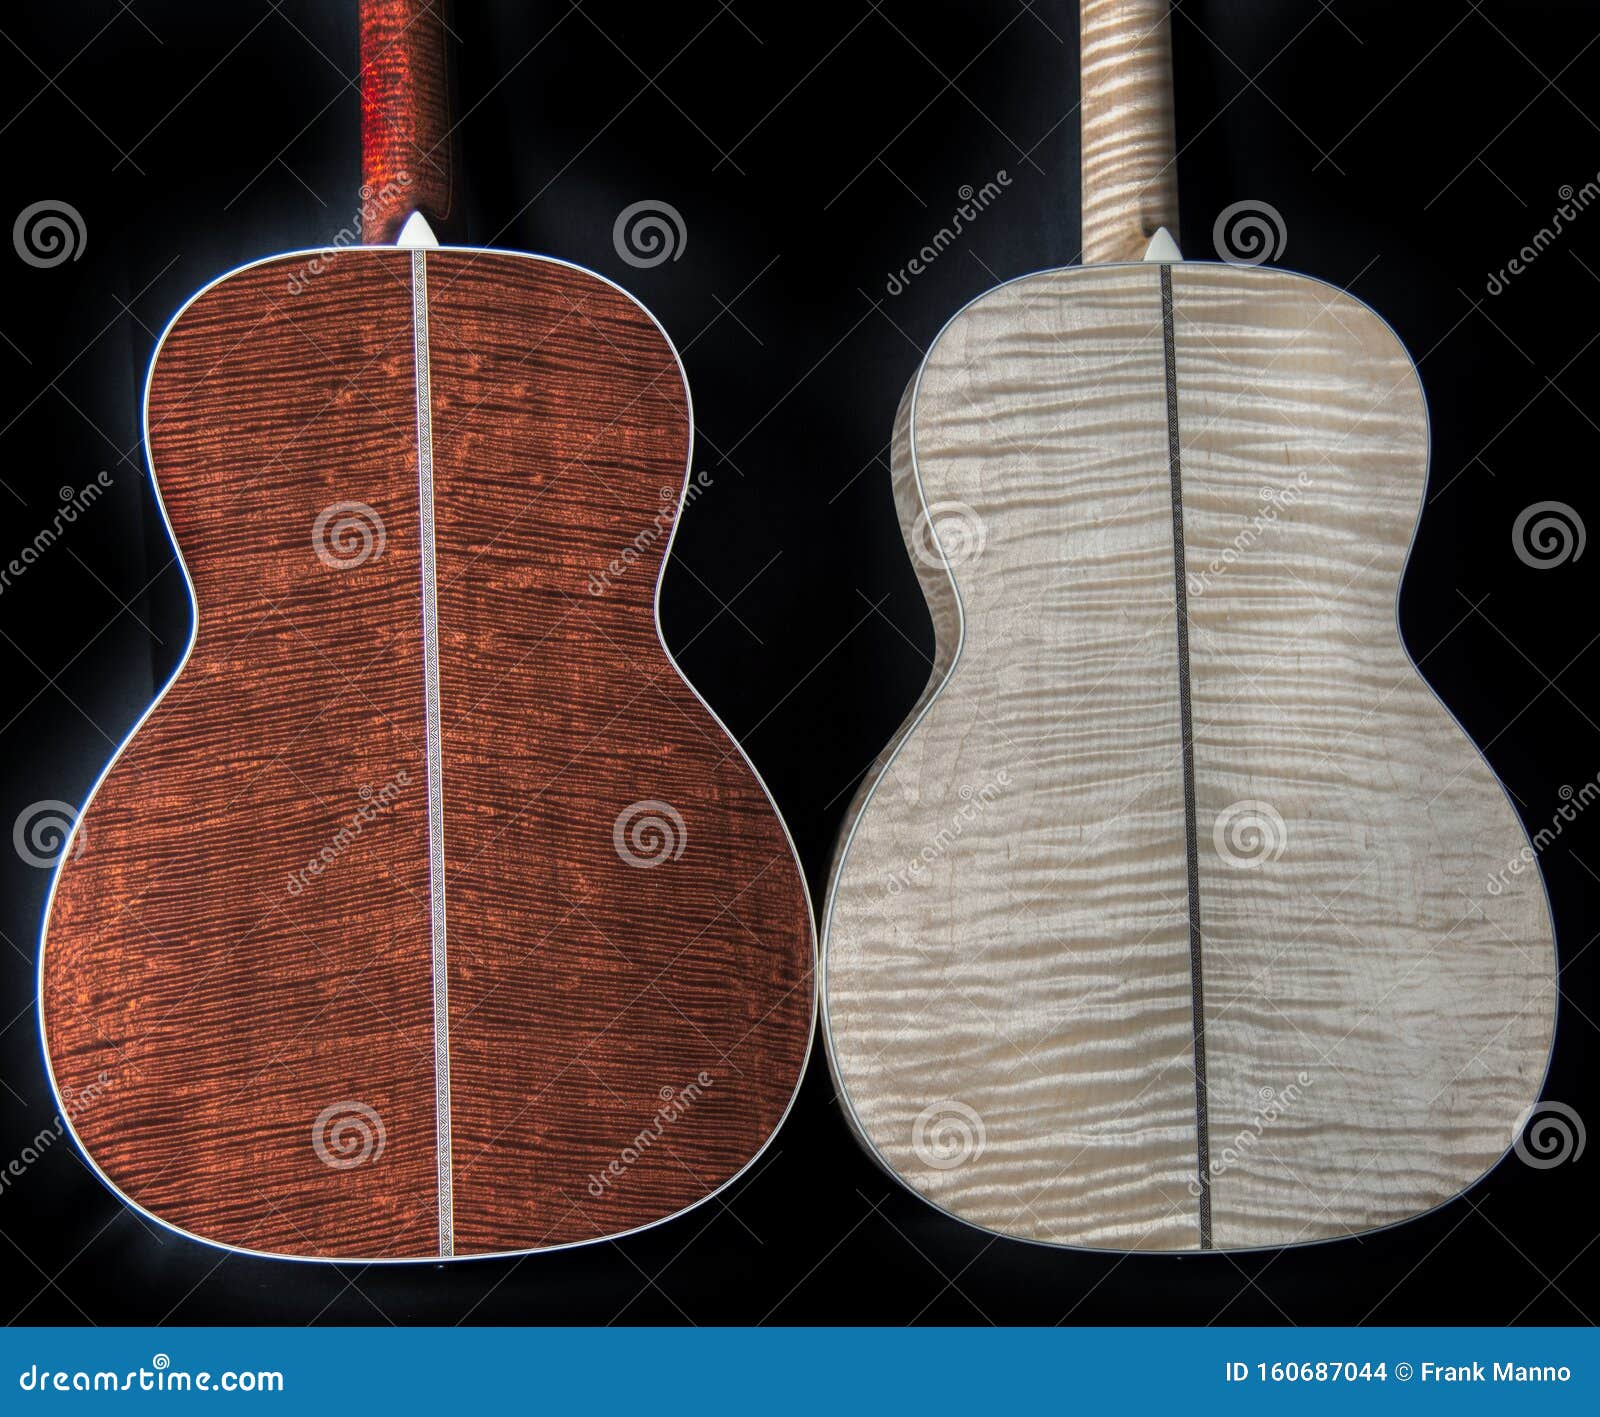 exotic, rare and figured wood on the backs of acoustic guitars - flamed maple figured tiger mahogany